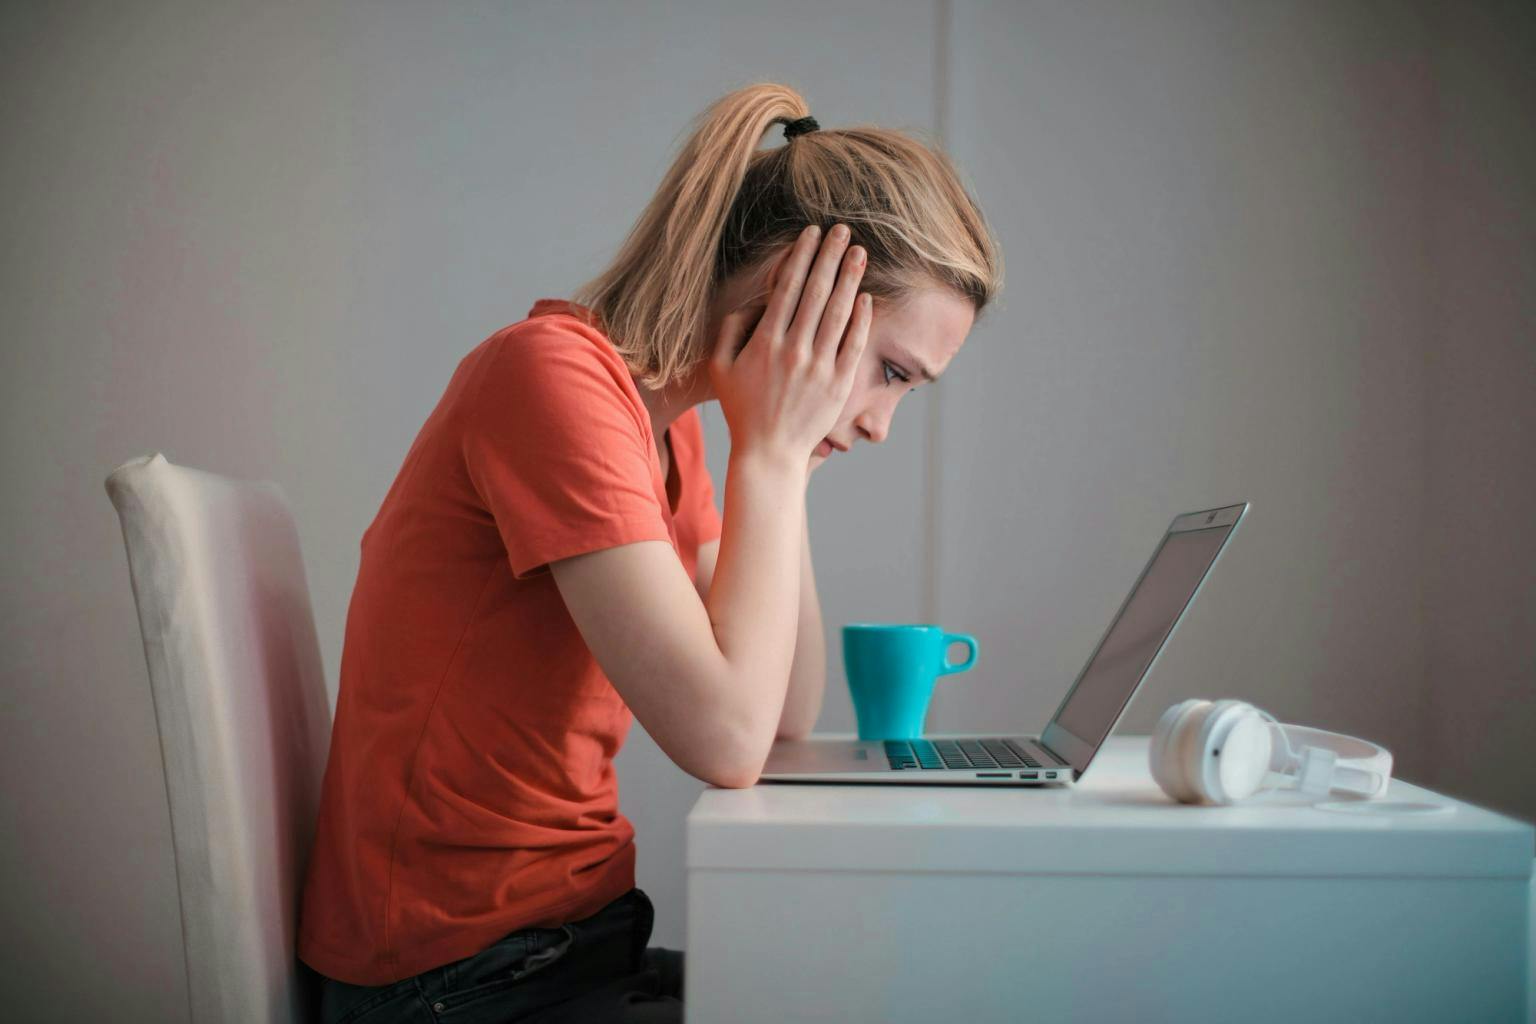 A women sits in front of a laptop with her head in her hands